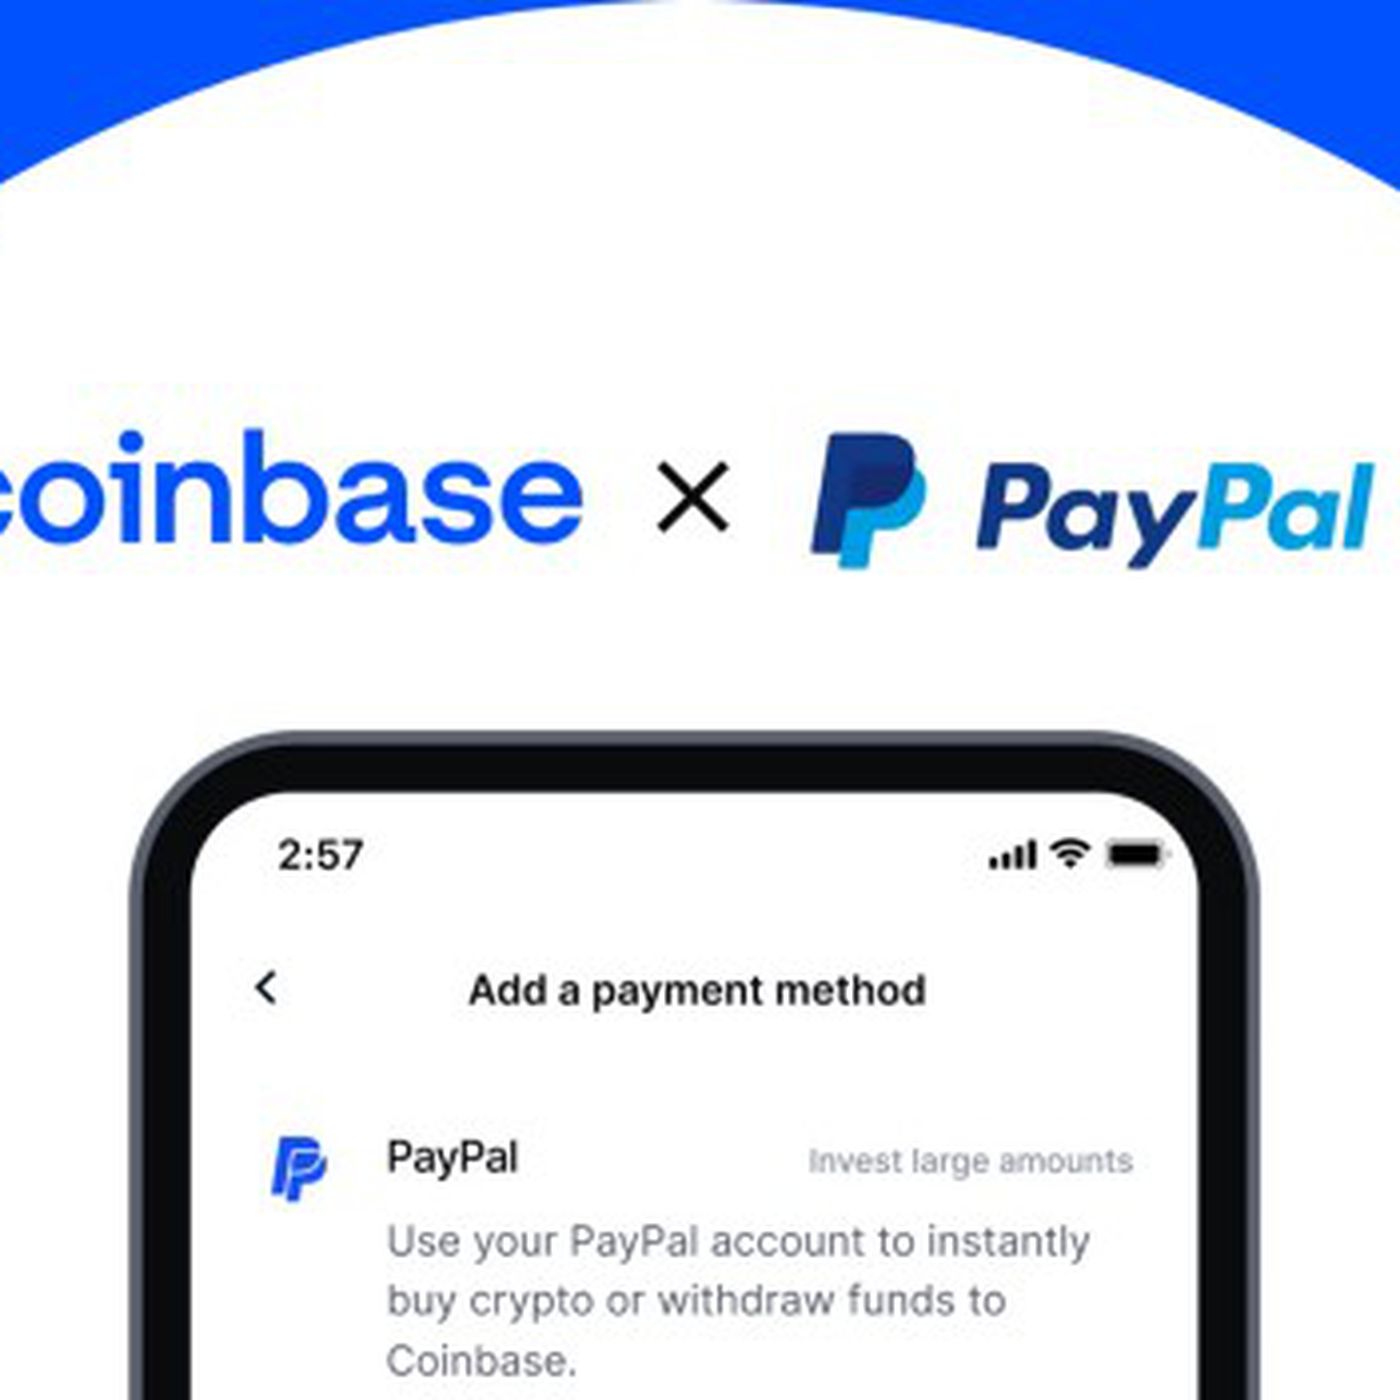 How do I buy Cryptocurrency on PayPal? | PayPal US